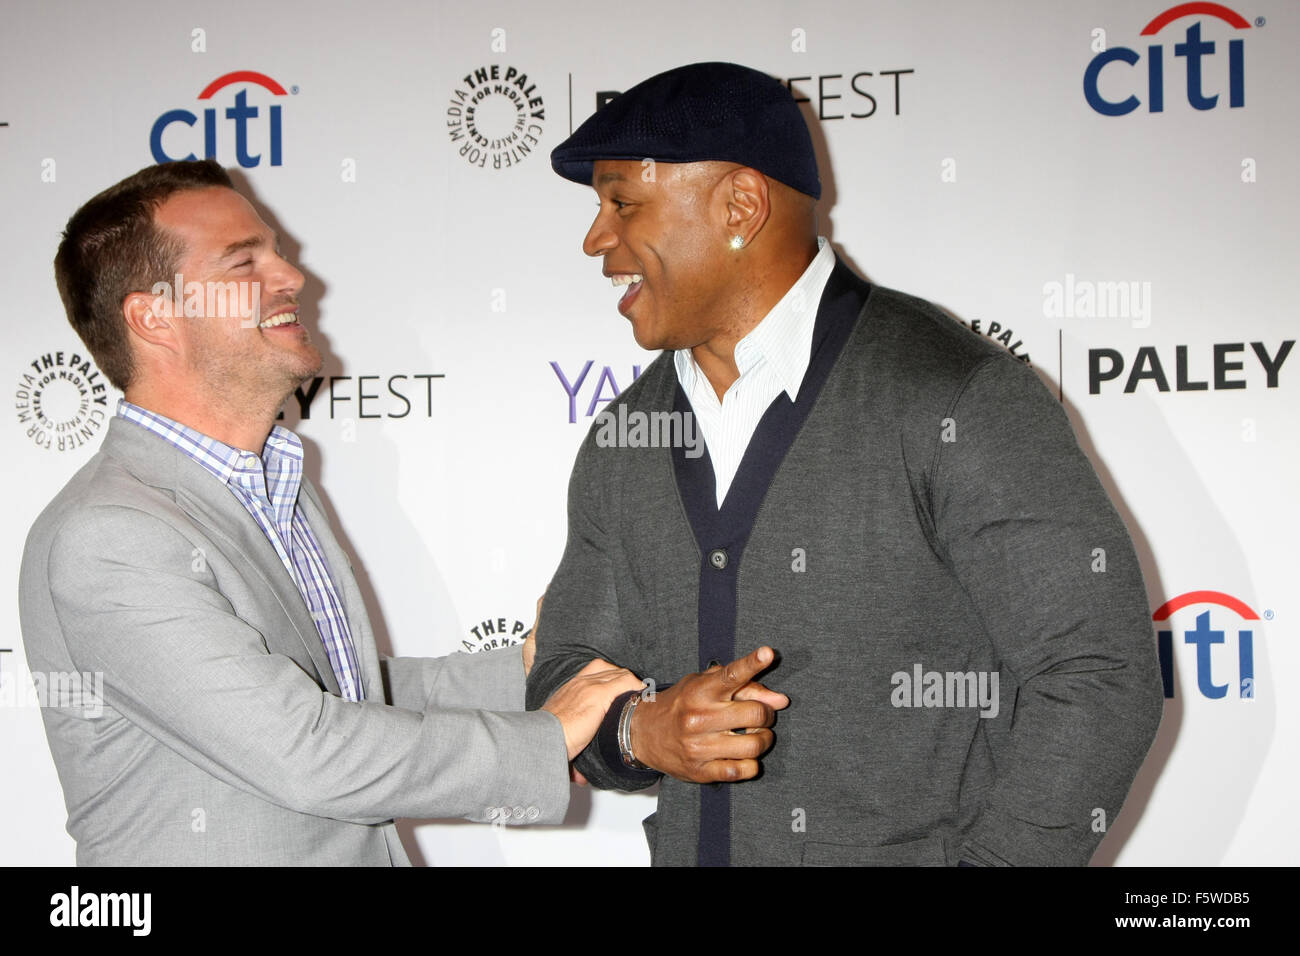 PaleyFest Special Event: 'NCIS: Los Angeles' Fall Premiere - Arrivals  Featuring: Chris O'Donnell, LL Cool J, aka James Todd Smith Where: Beverly Hills, California, United States When: 11 Sep 2015 Stock Photo